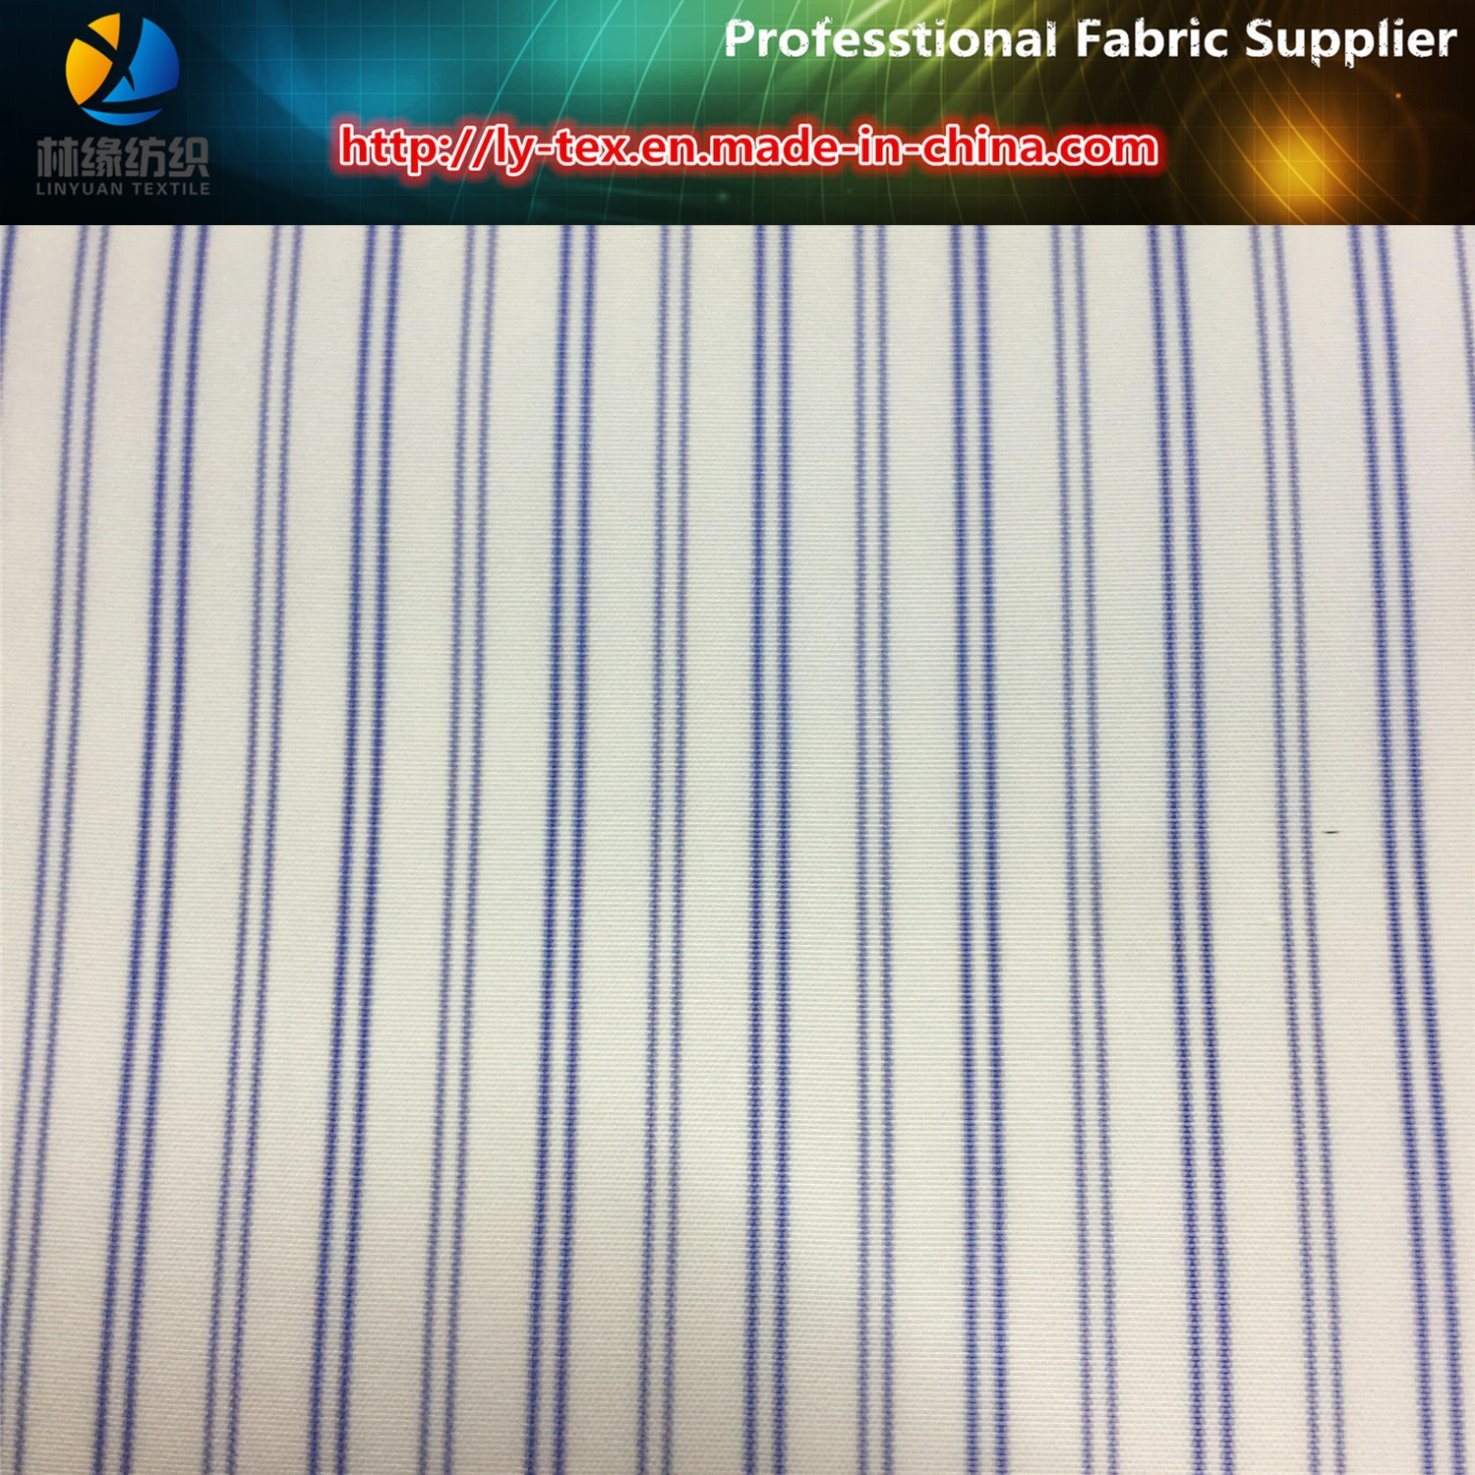 Multicolor Lining, Stripe Lining, Polyester Fabric, Suit Lining Fabric (S113.117)